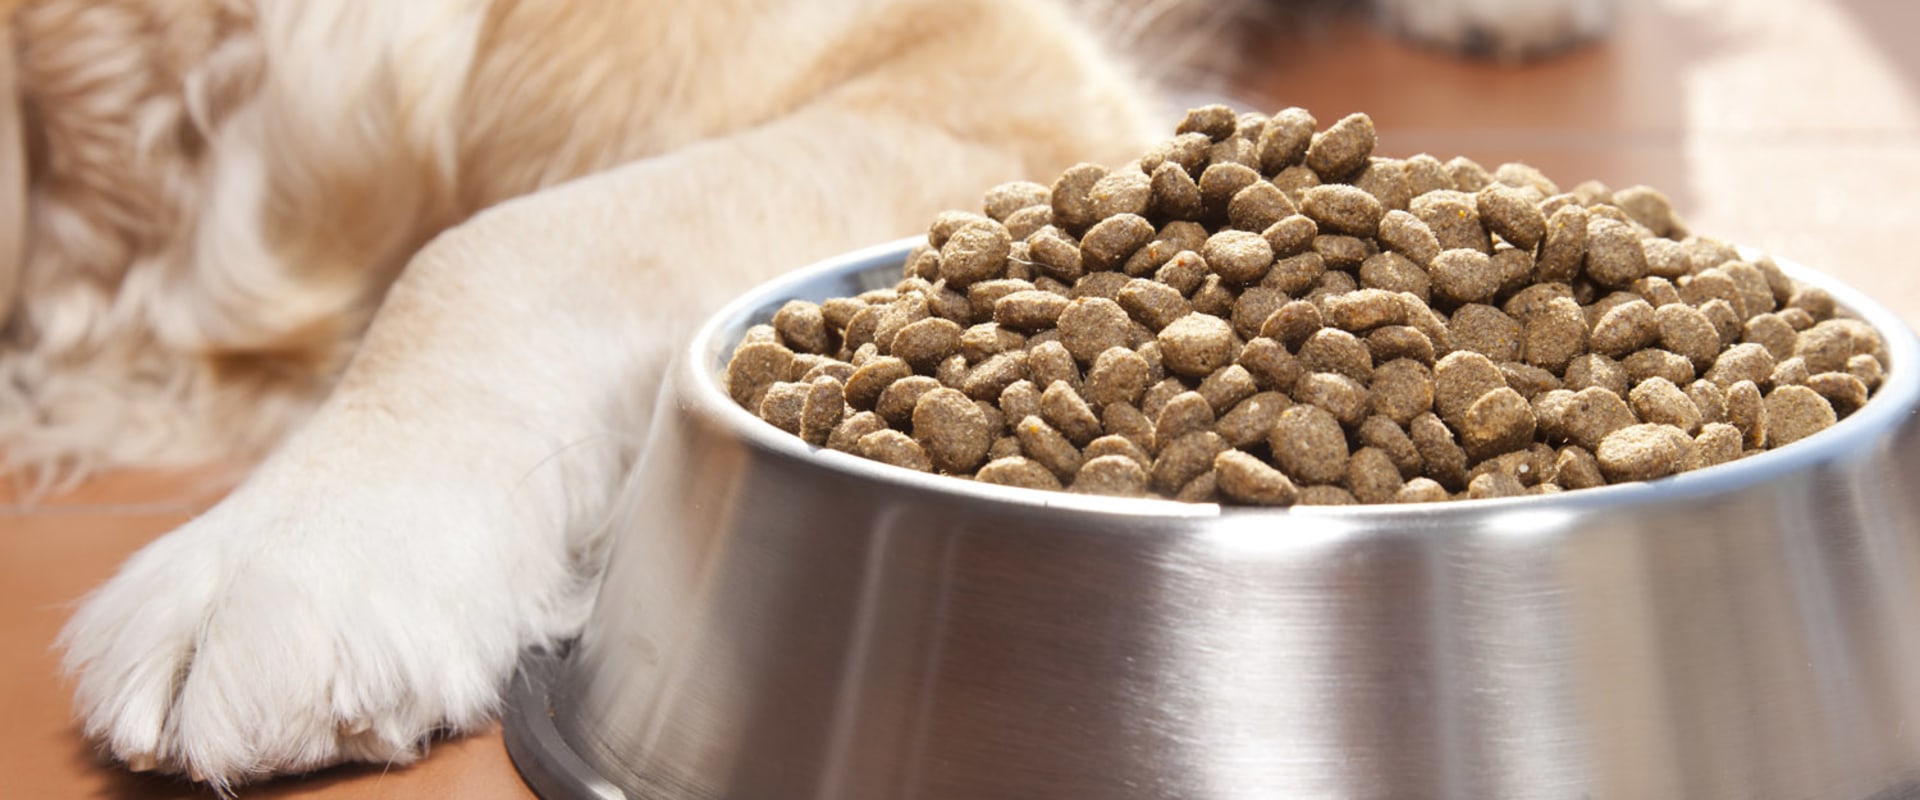 What popular dog food is killing dogs?